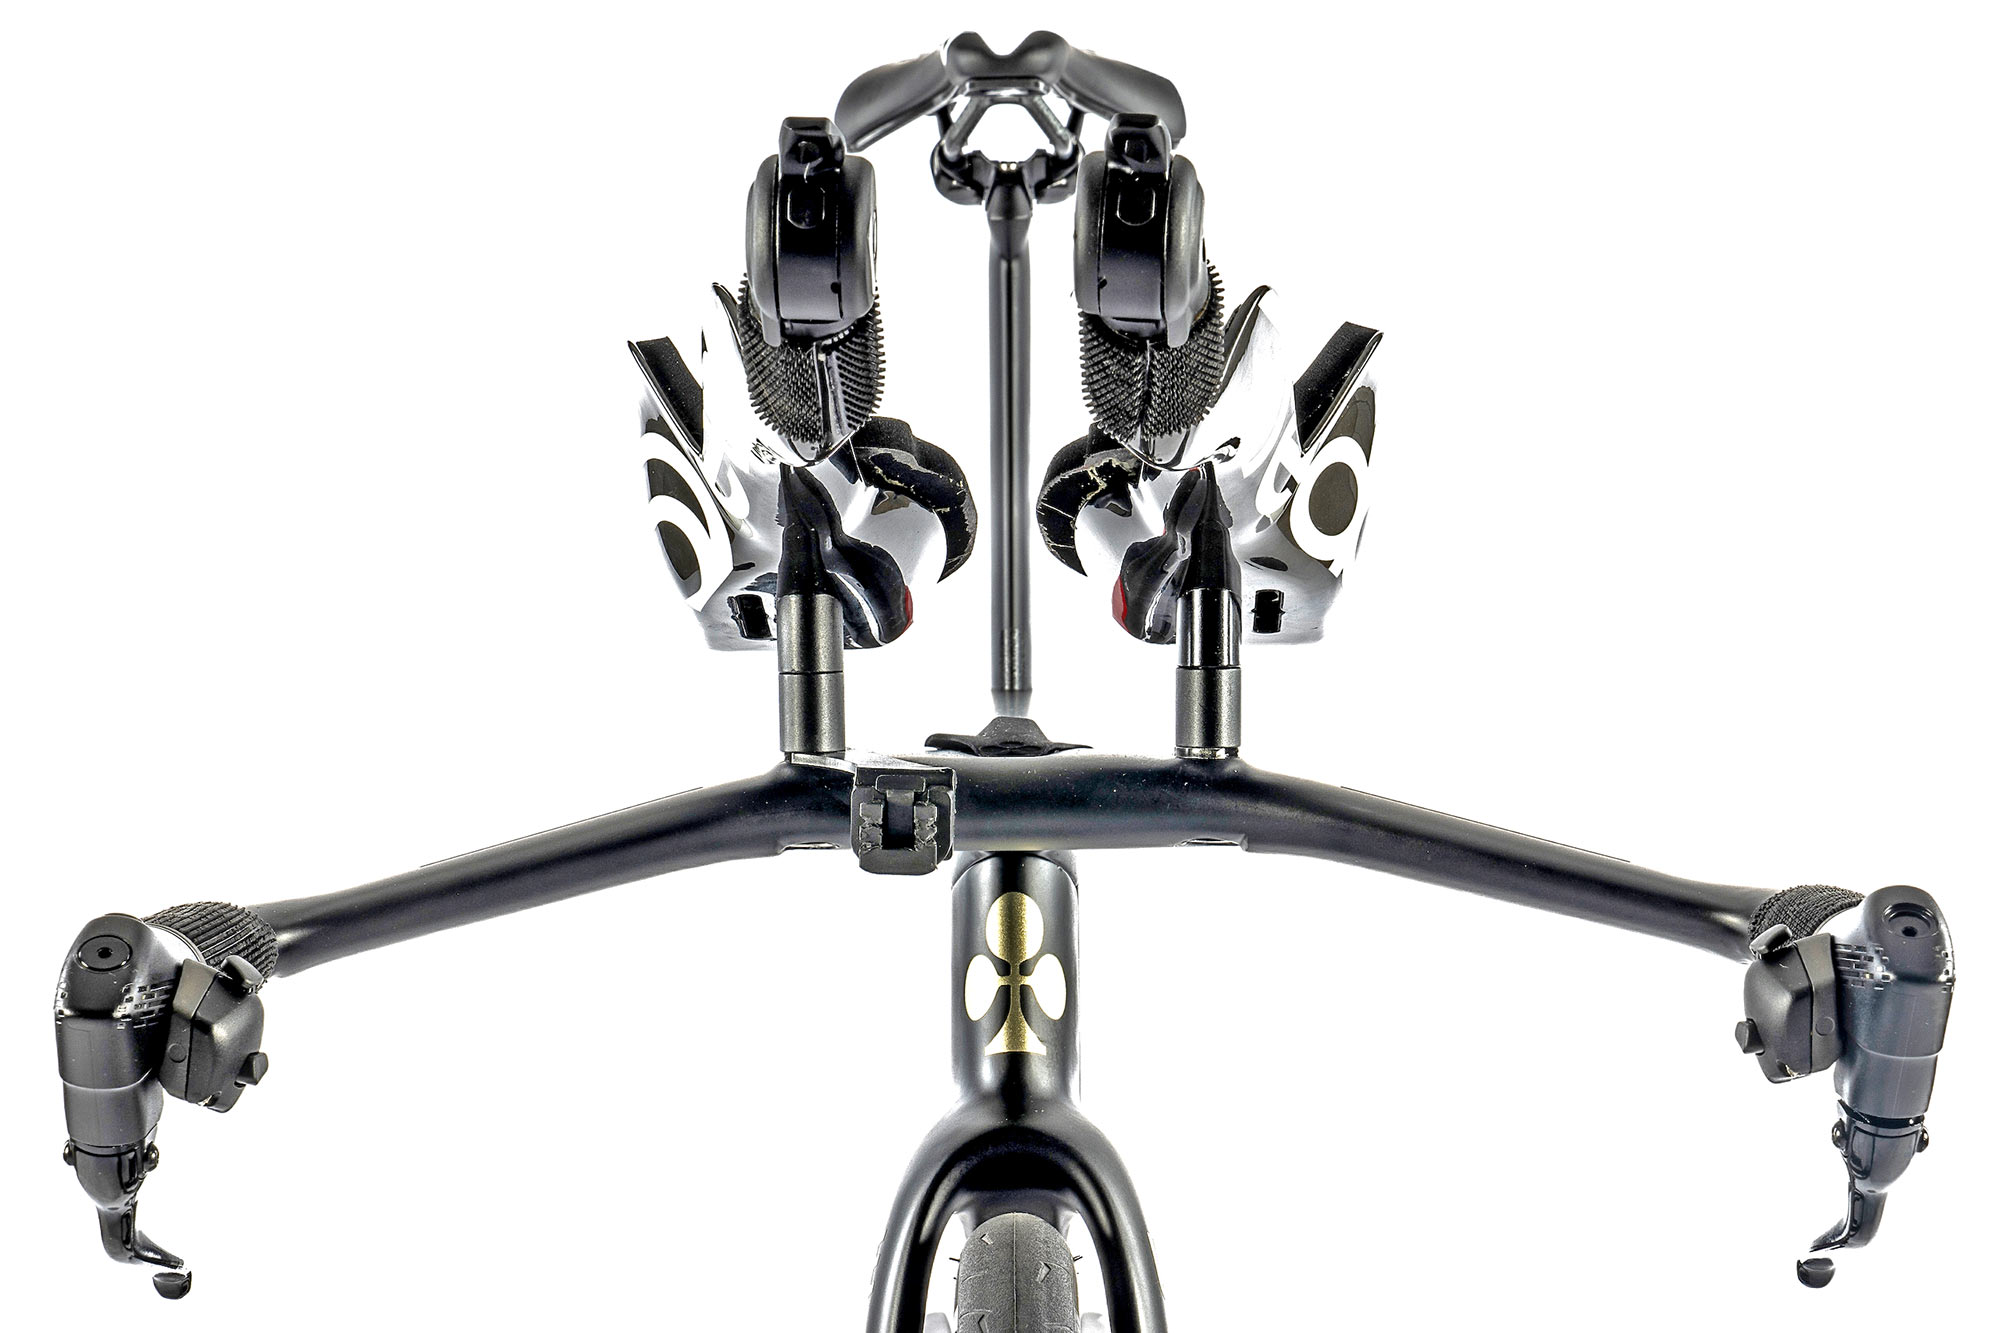 Campagnolo Super Record EPS 12 time trial brake levers with 12-speed shifters, cockpit from front